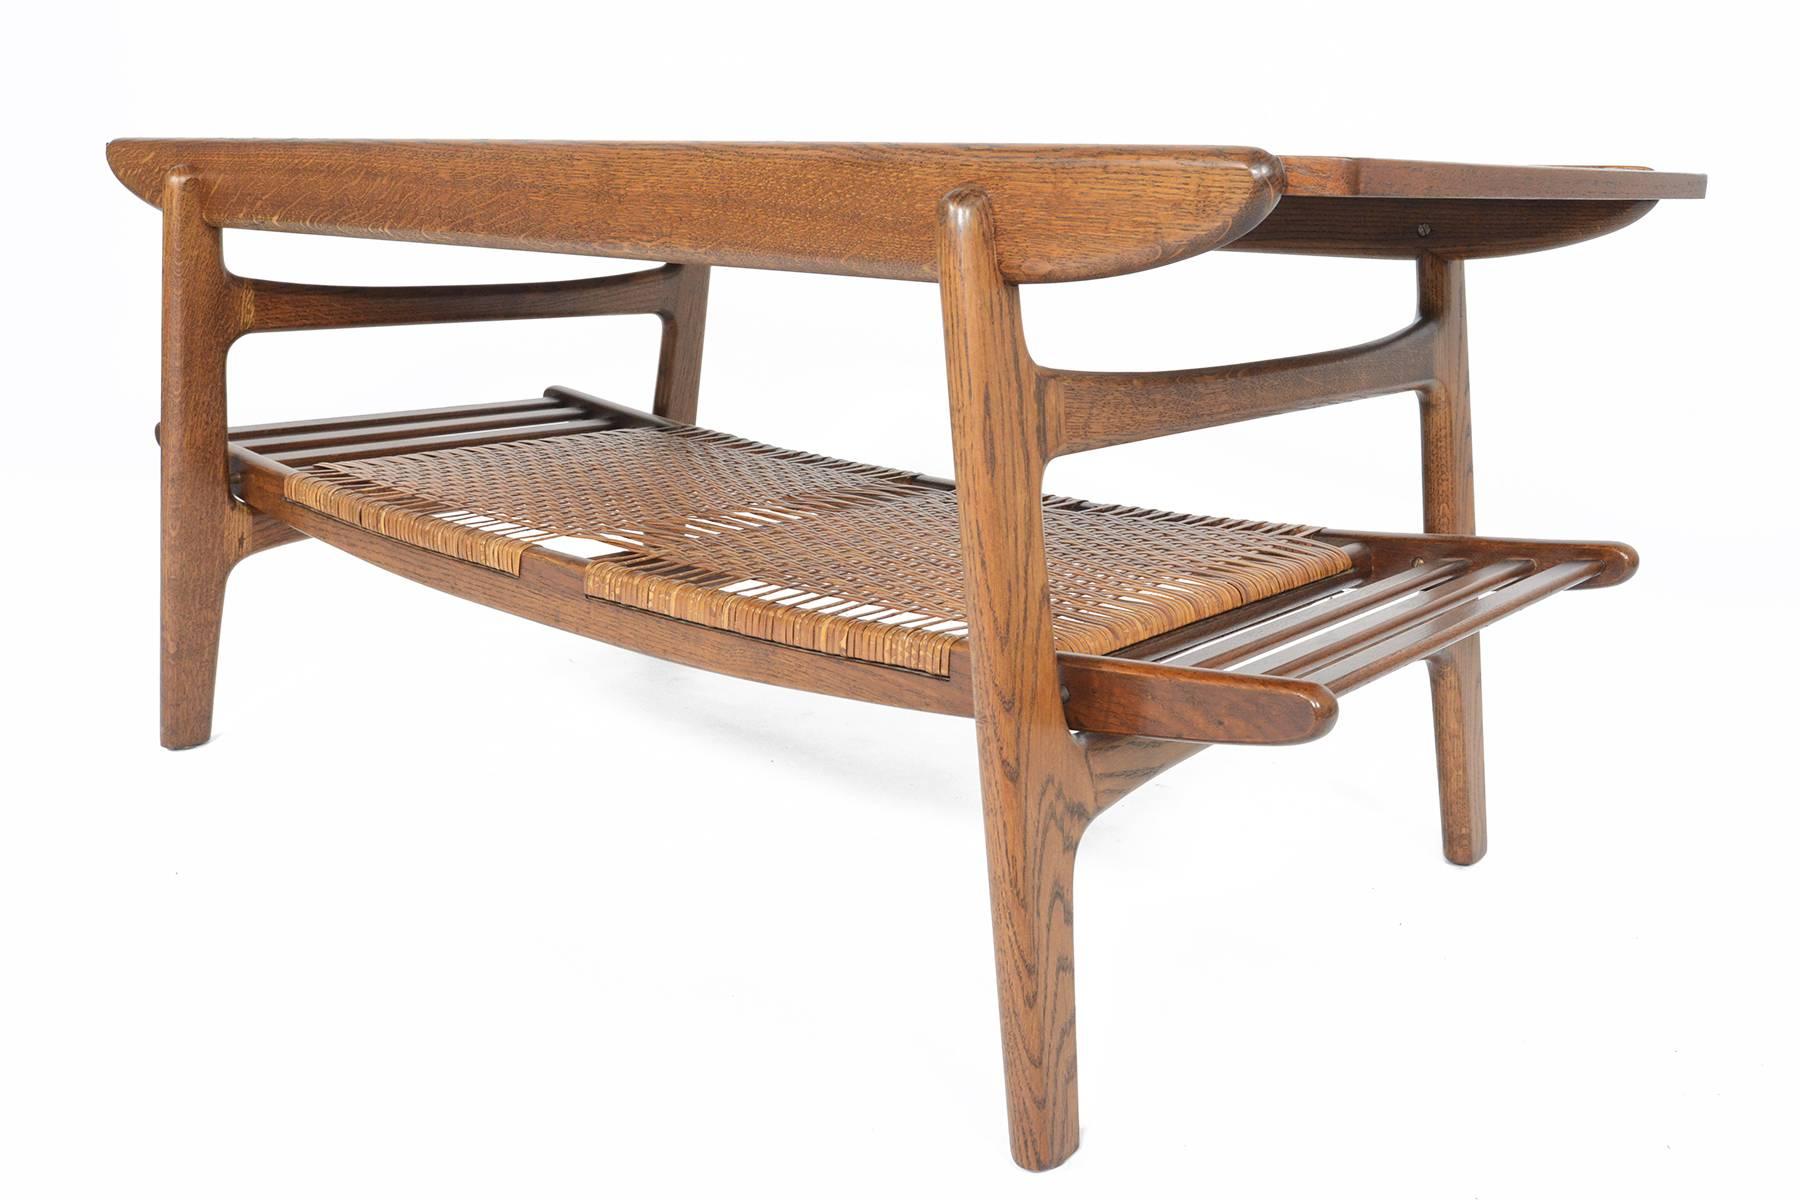 This Danish modern Mid-Century surfboard coffee table in teak and oak is the statement piece your living room has been waiting for! A gorgeous teak slab is nestled in a quarter, sawn oak frame. An original cane rack offers a wonderful storage